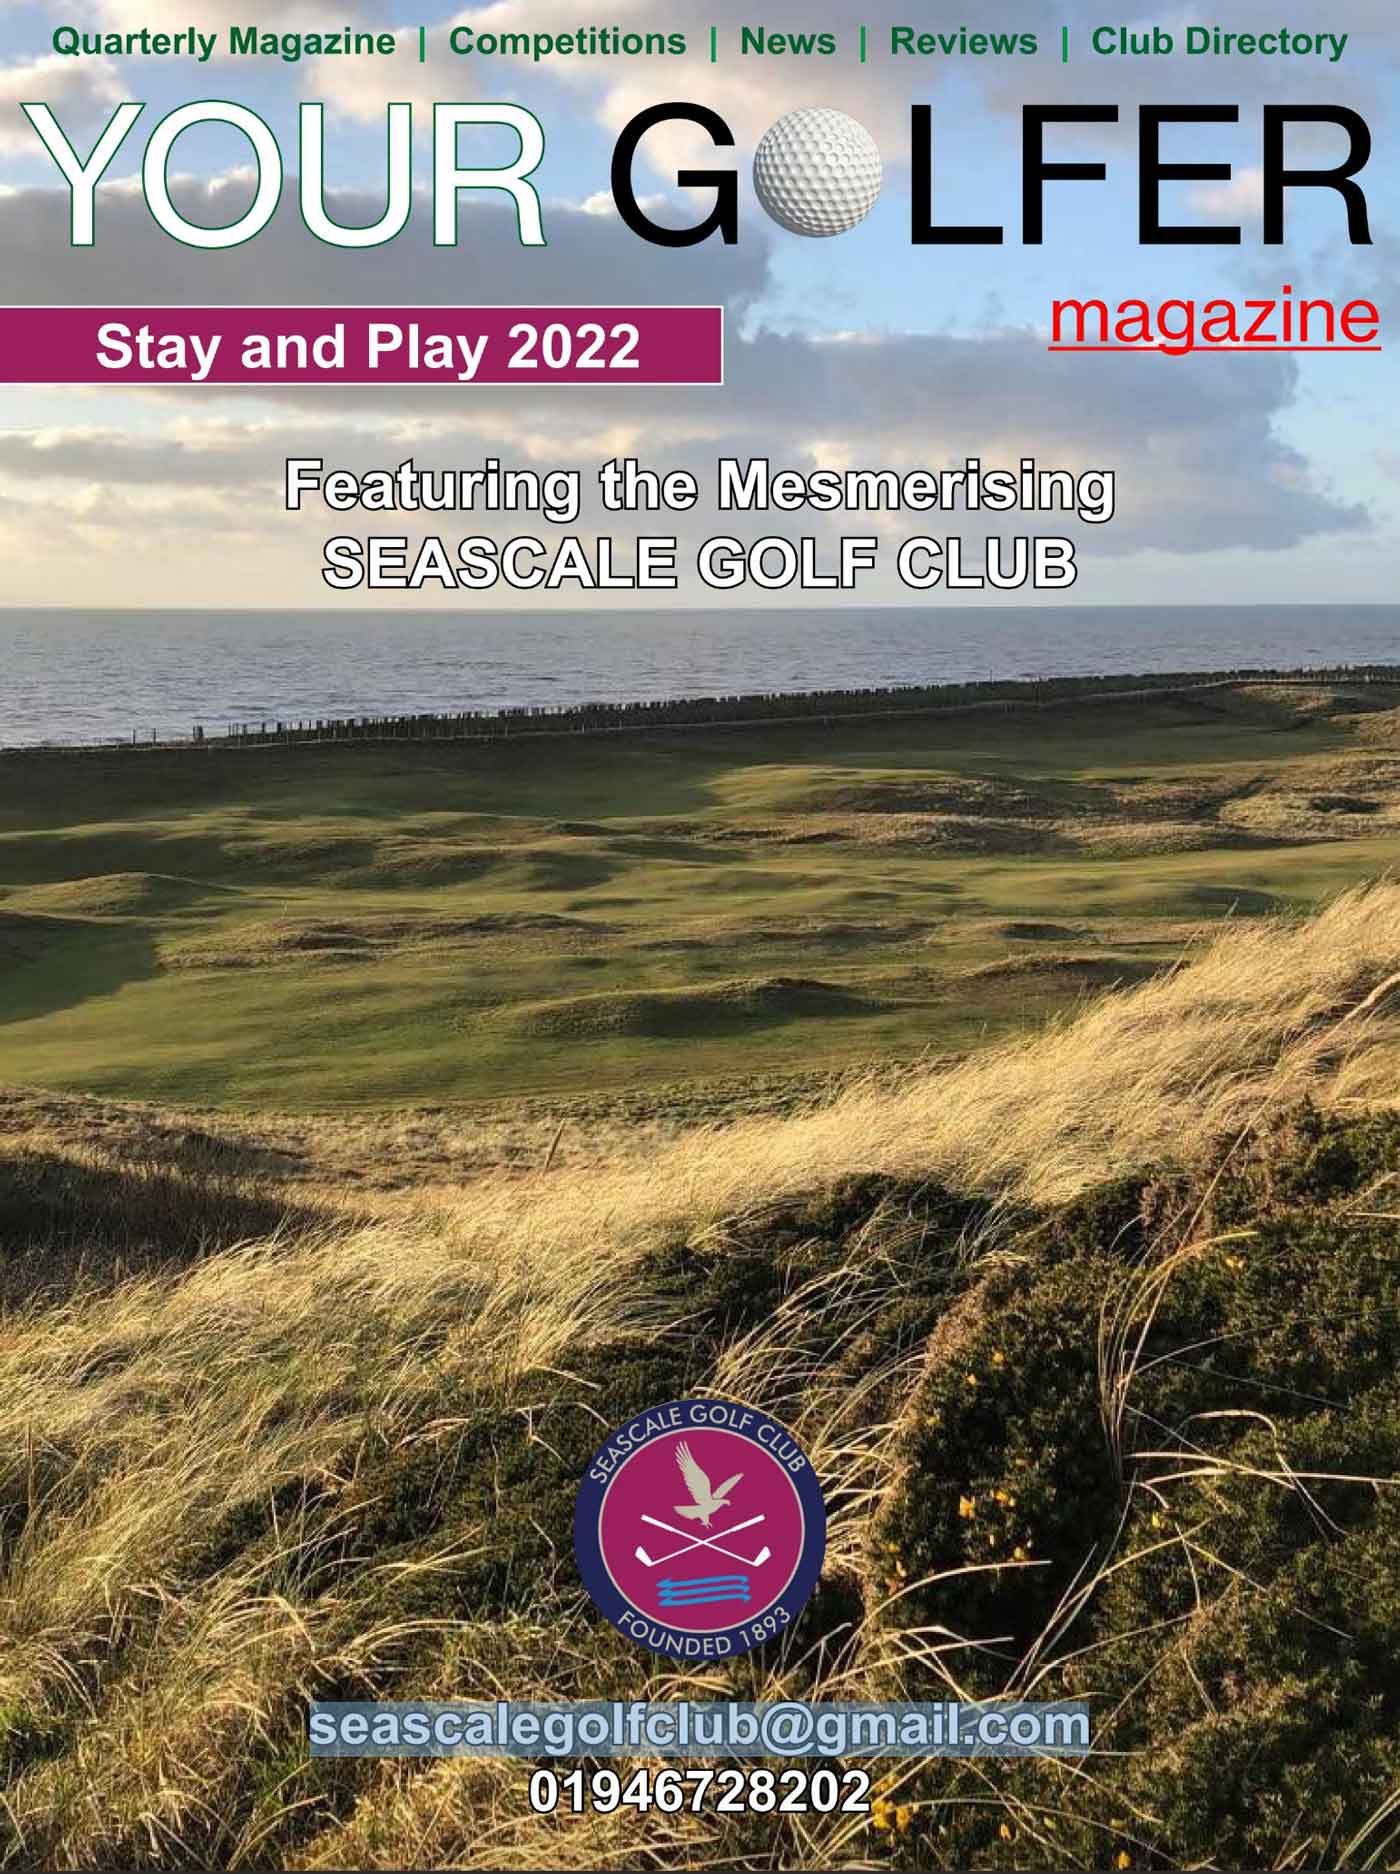 Stay and Play 2022 magazine by Your Golfer Magazine